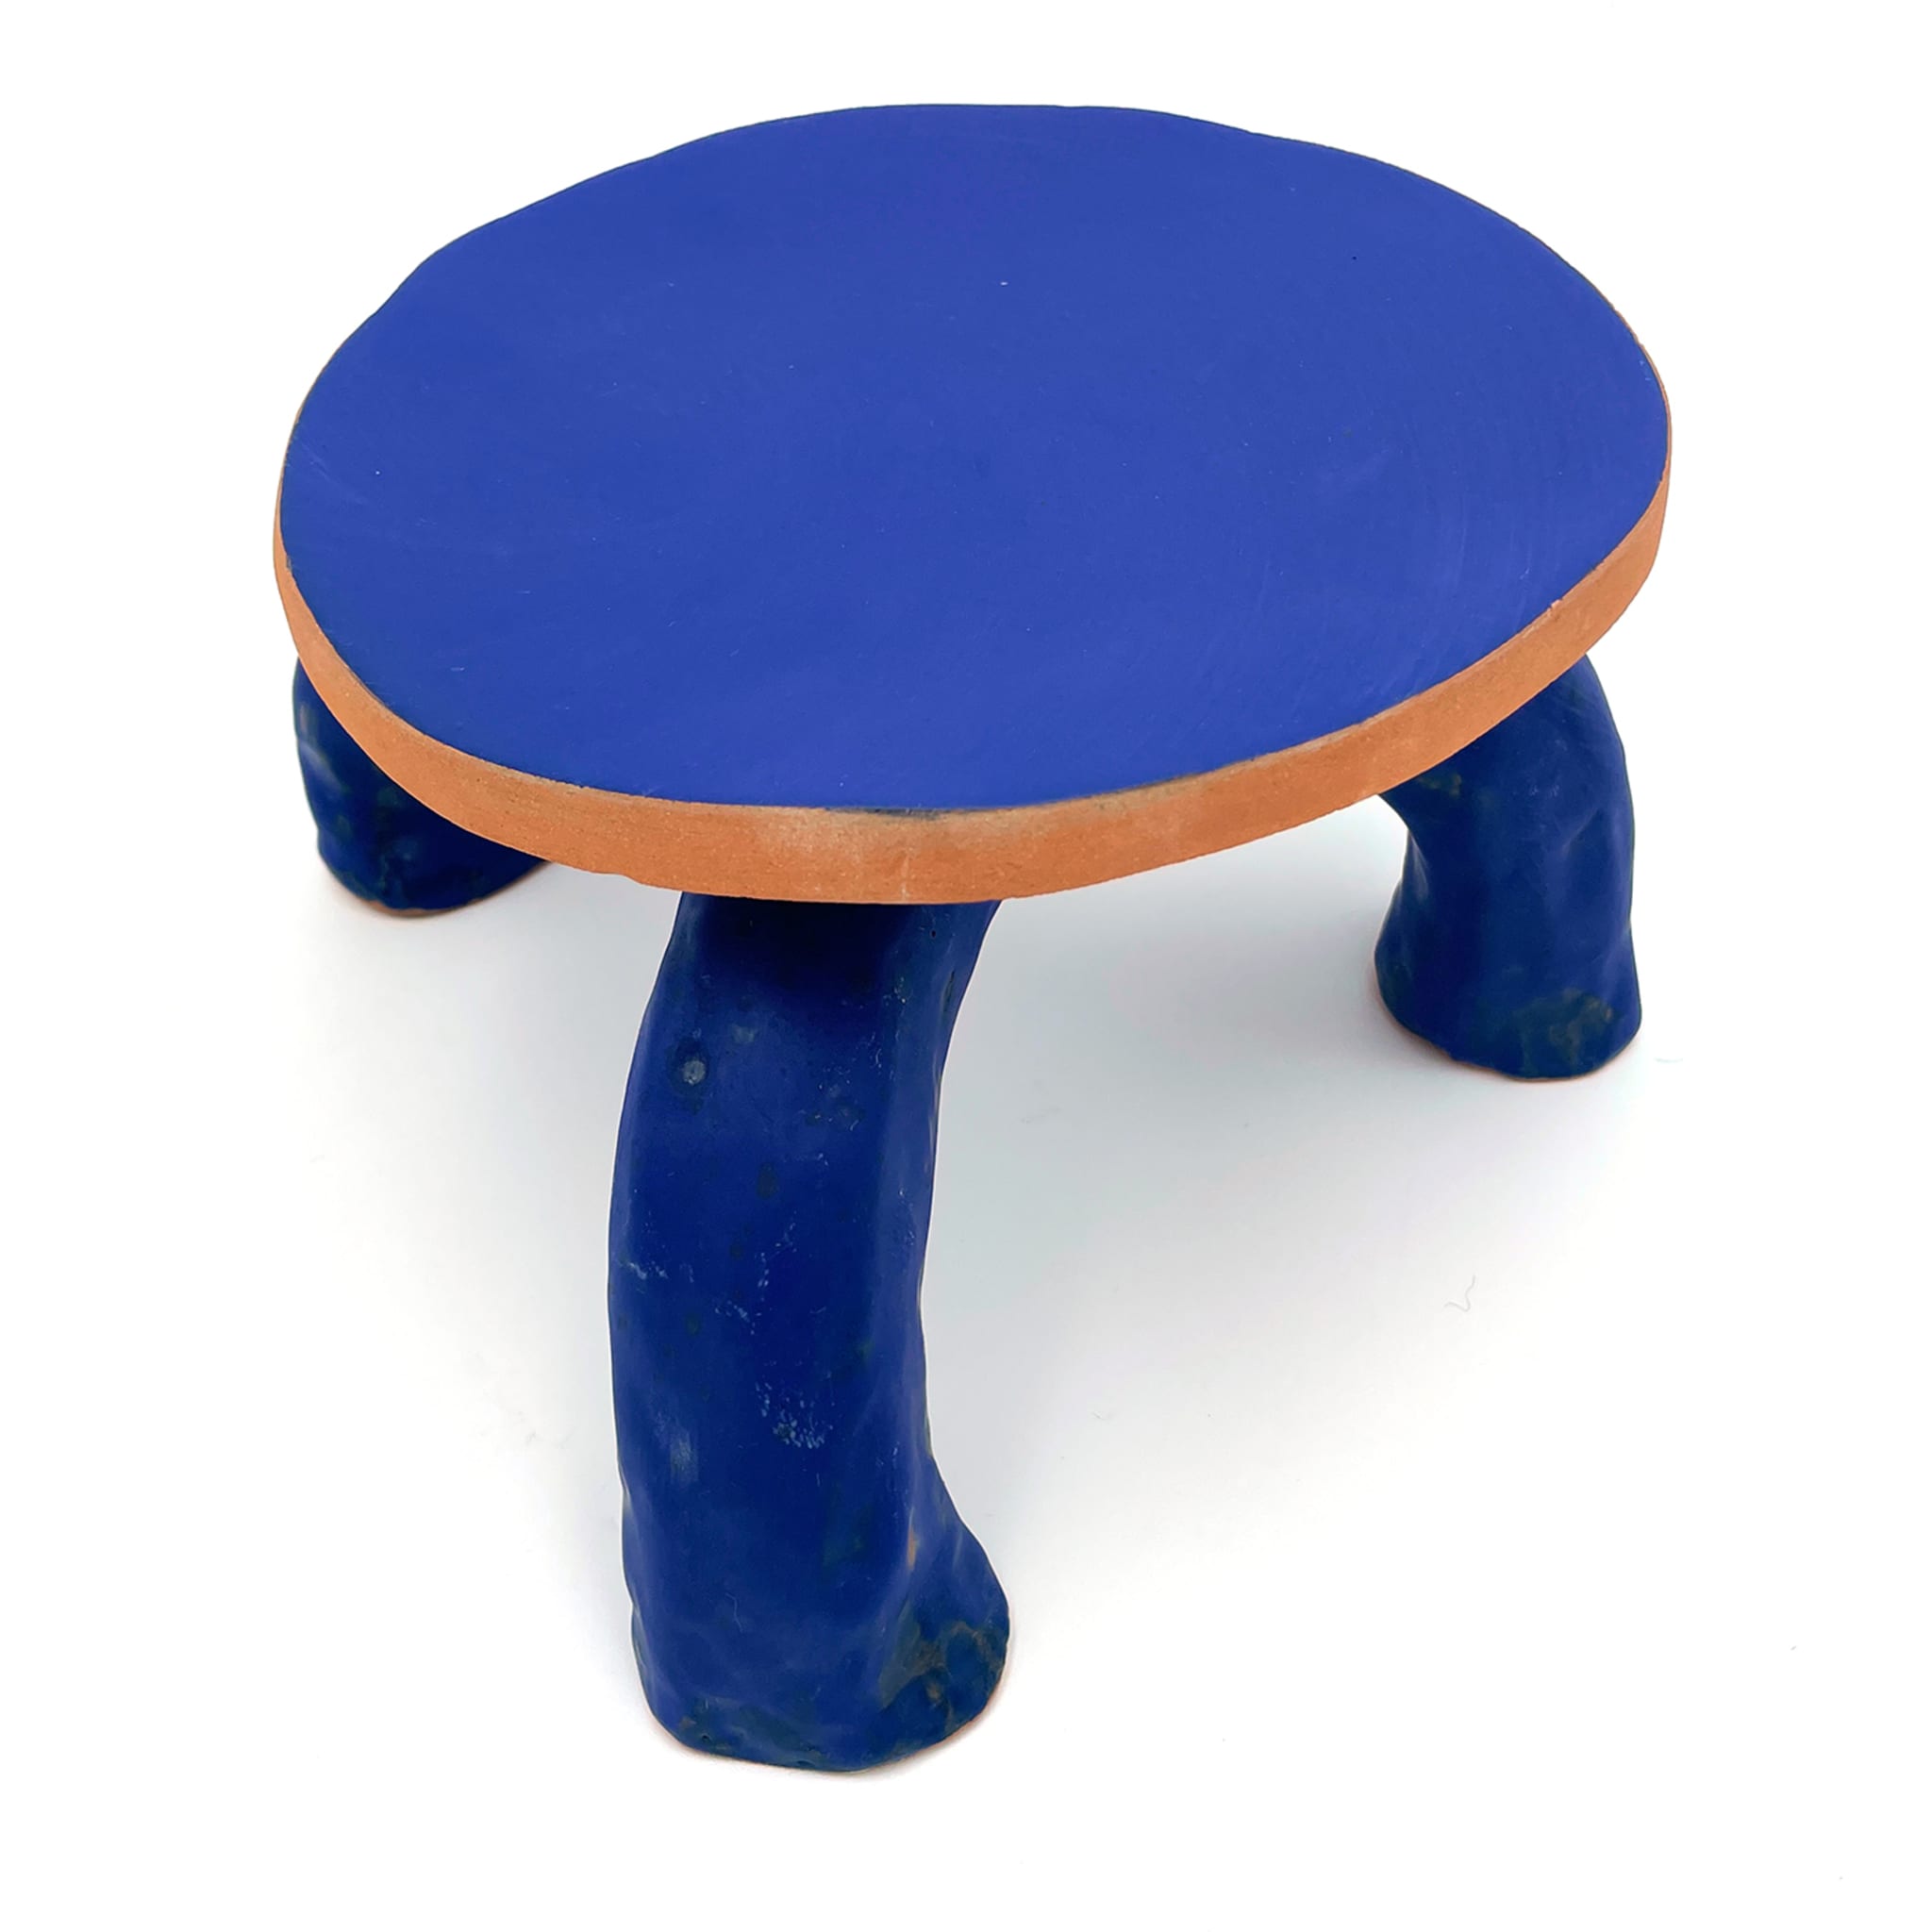 Fungo 3-legged Egyptian Blue and Matte Blue Cake Stand - Alternative view 4